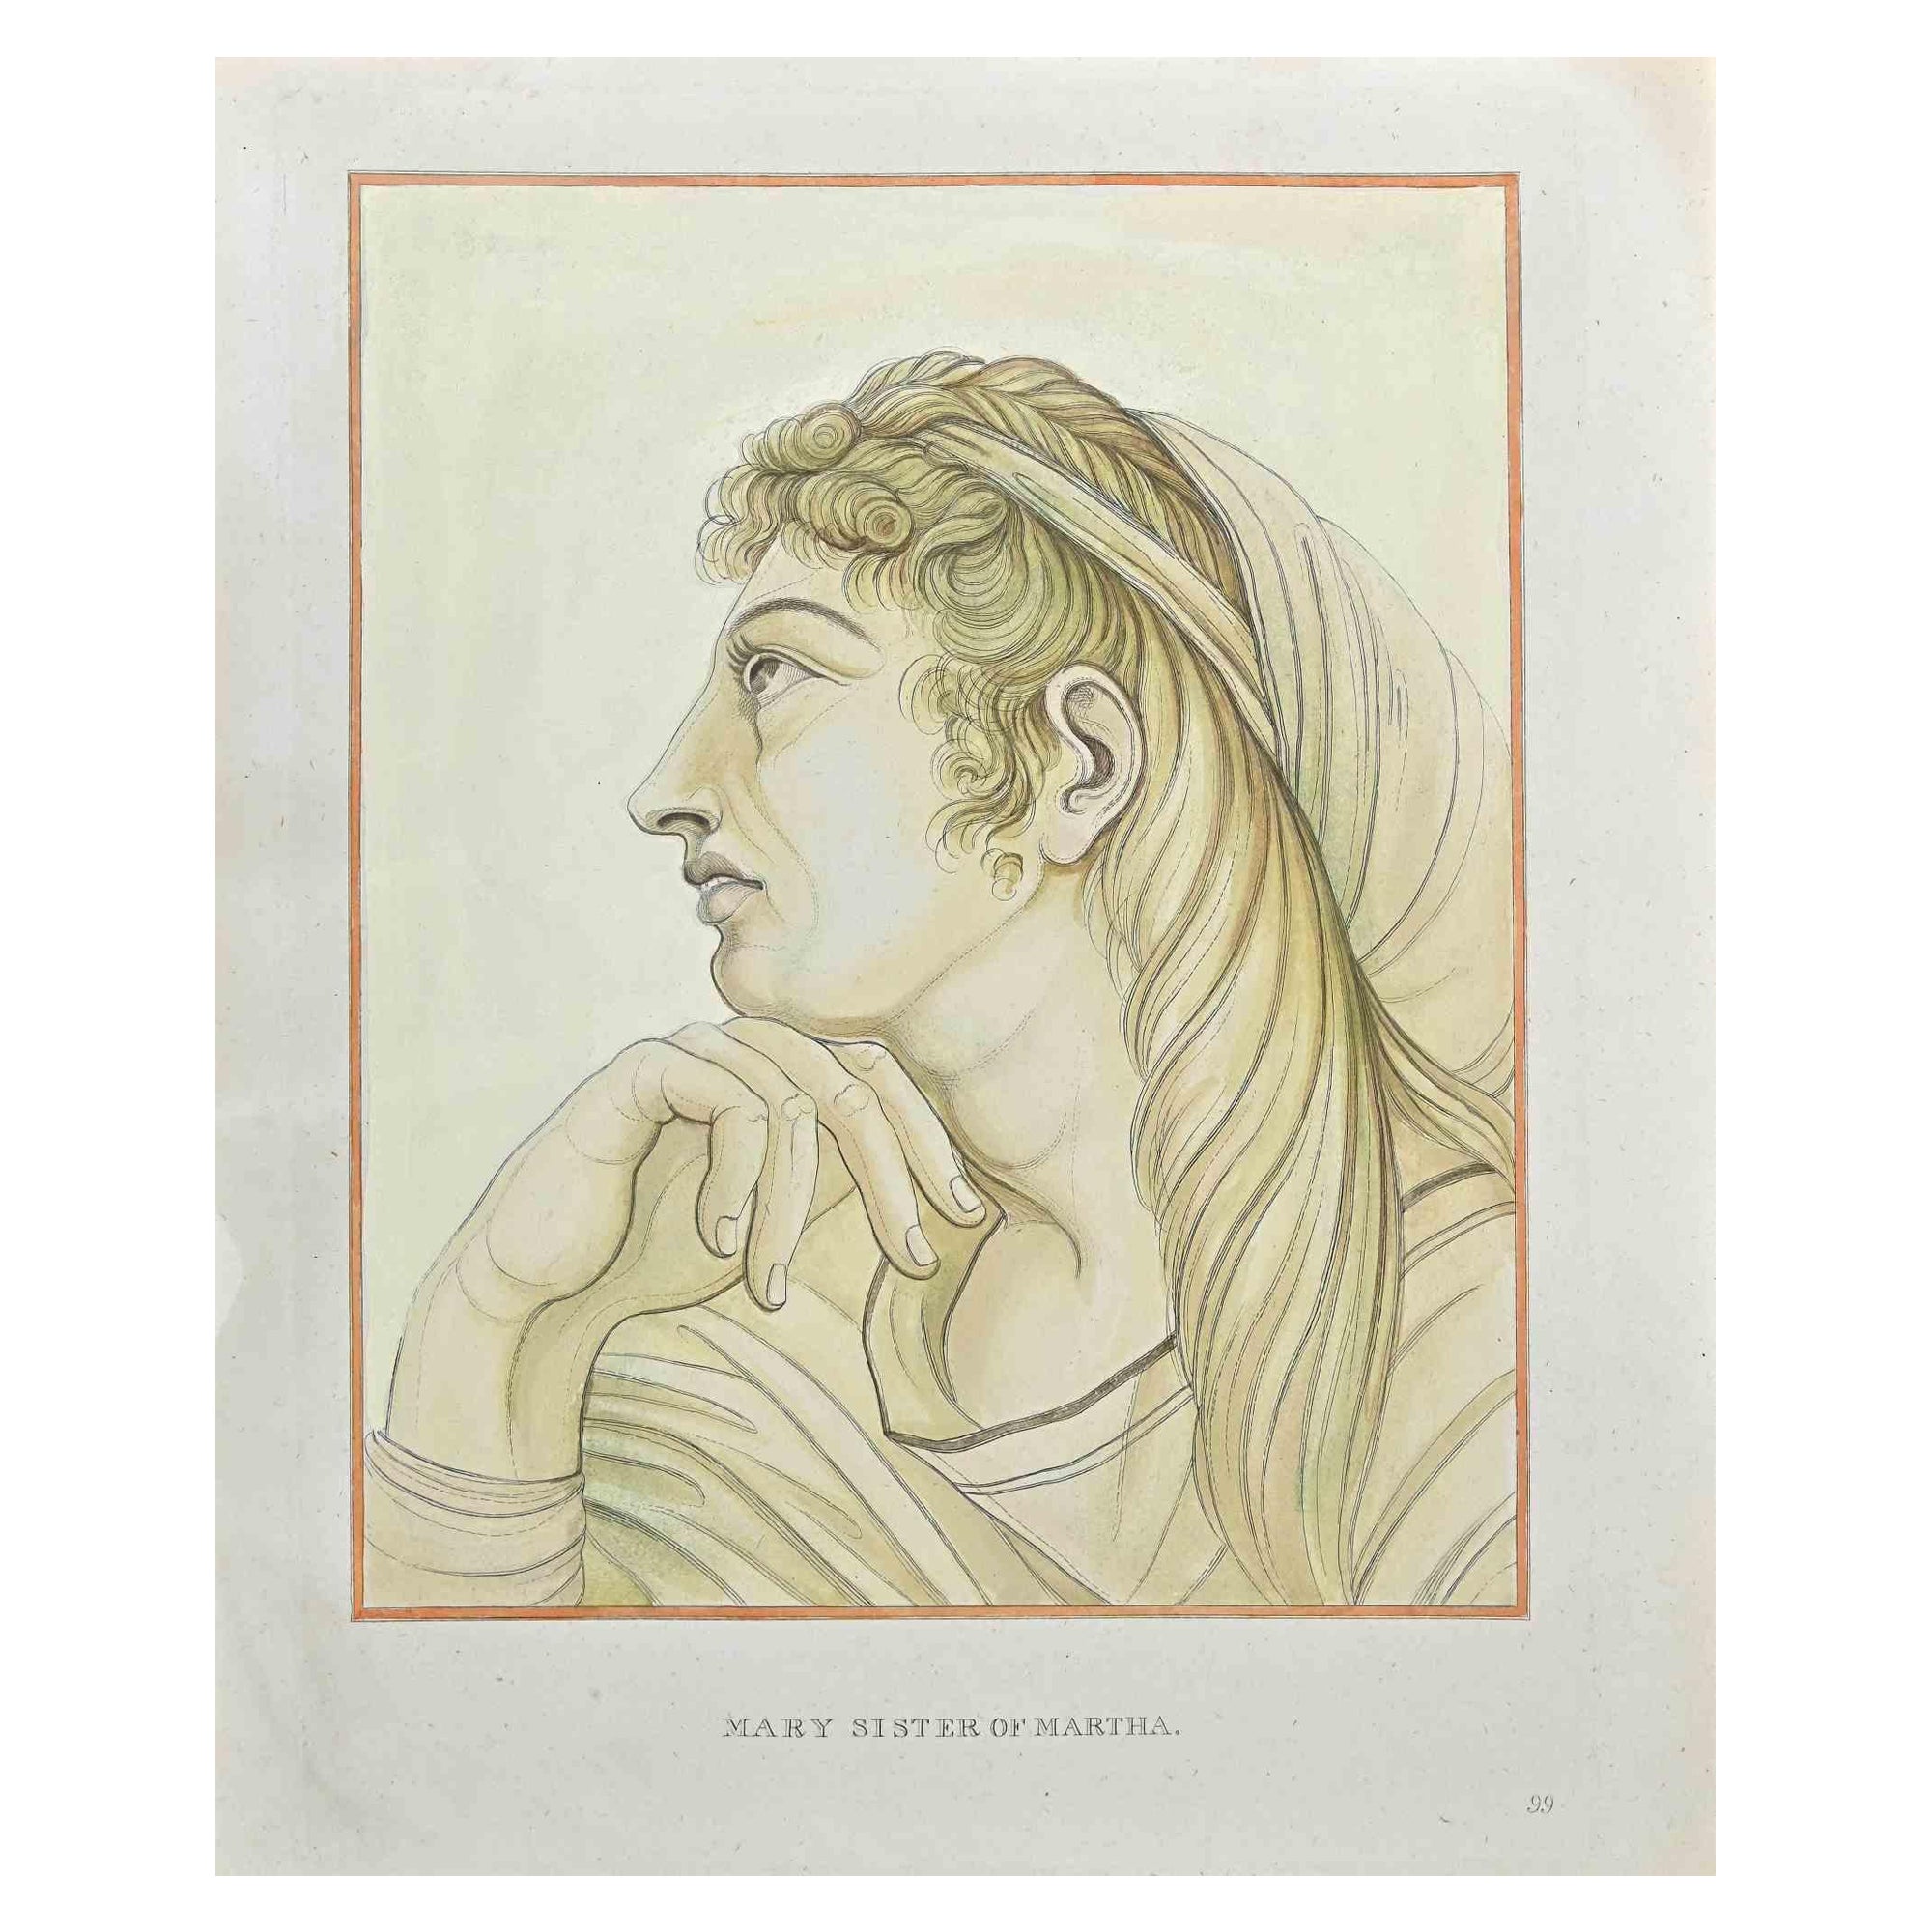 Mary Sister Of Marthais an etching realized by Thomas Holloway for Johann Caspar Lavater's "Essays on Physiognomy, Designed to Promote the Knowledge and the Love of Mankind", London, Bensley, 1810. 

Good conditions.

Johann Caspar Lavater was a